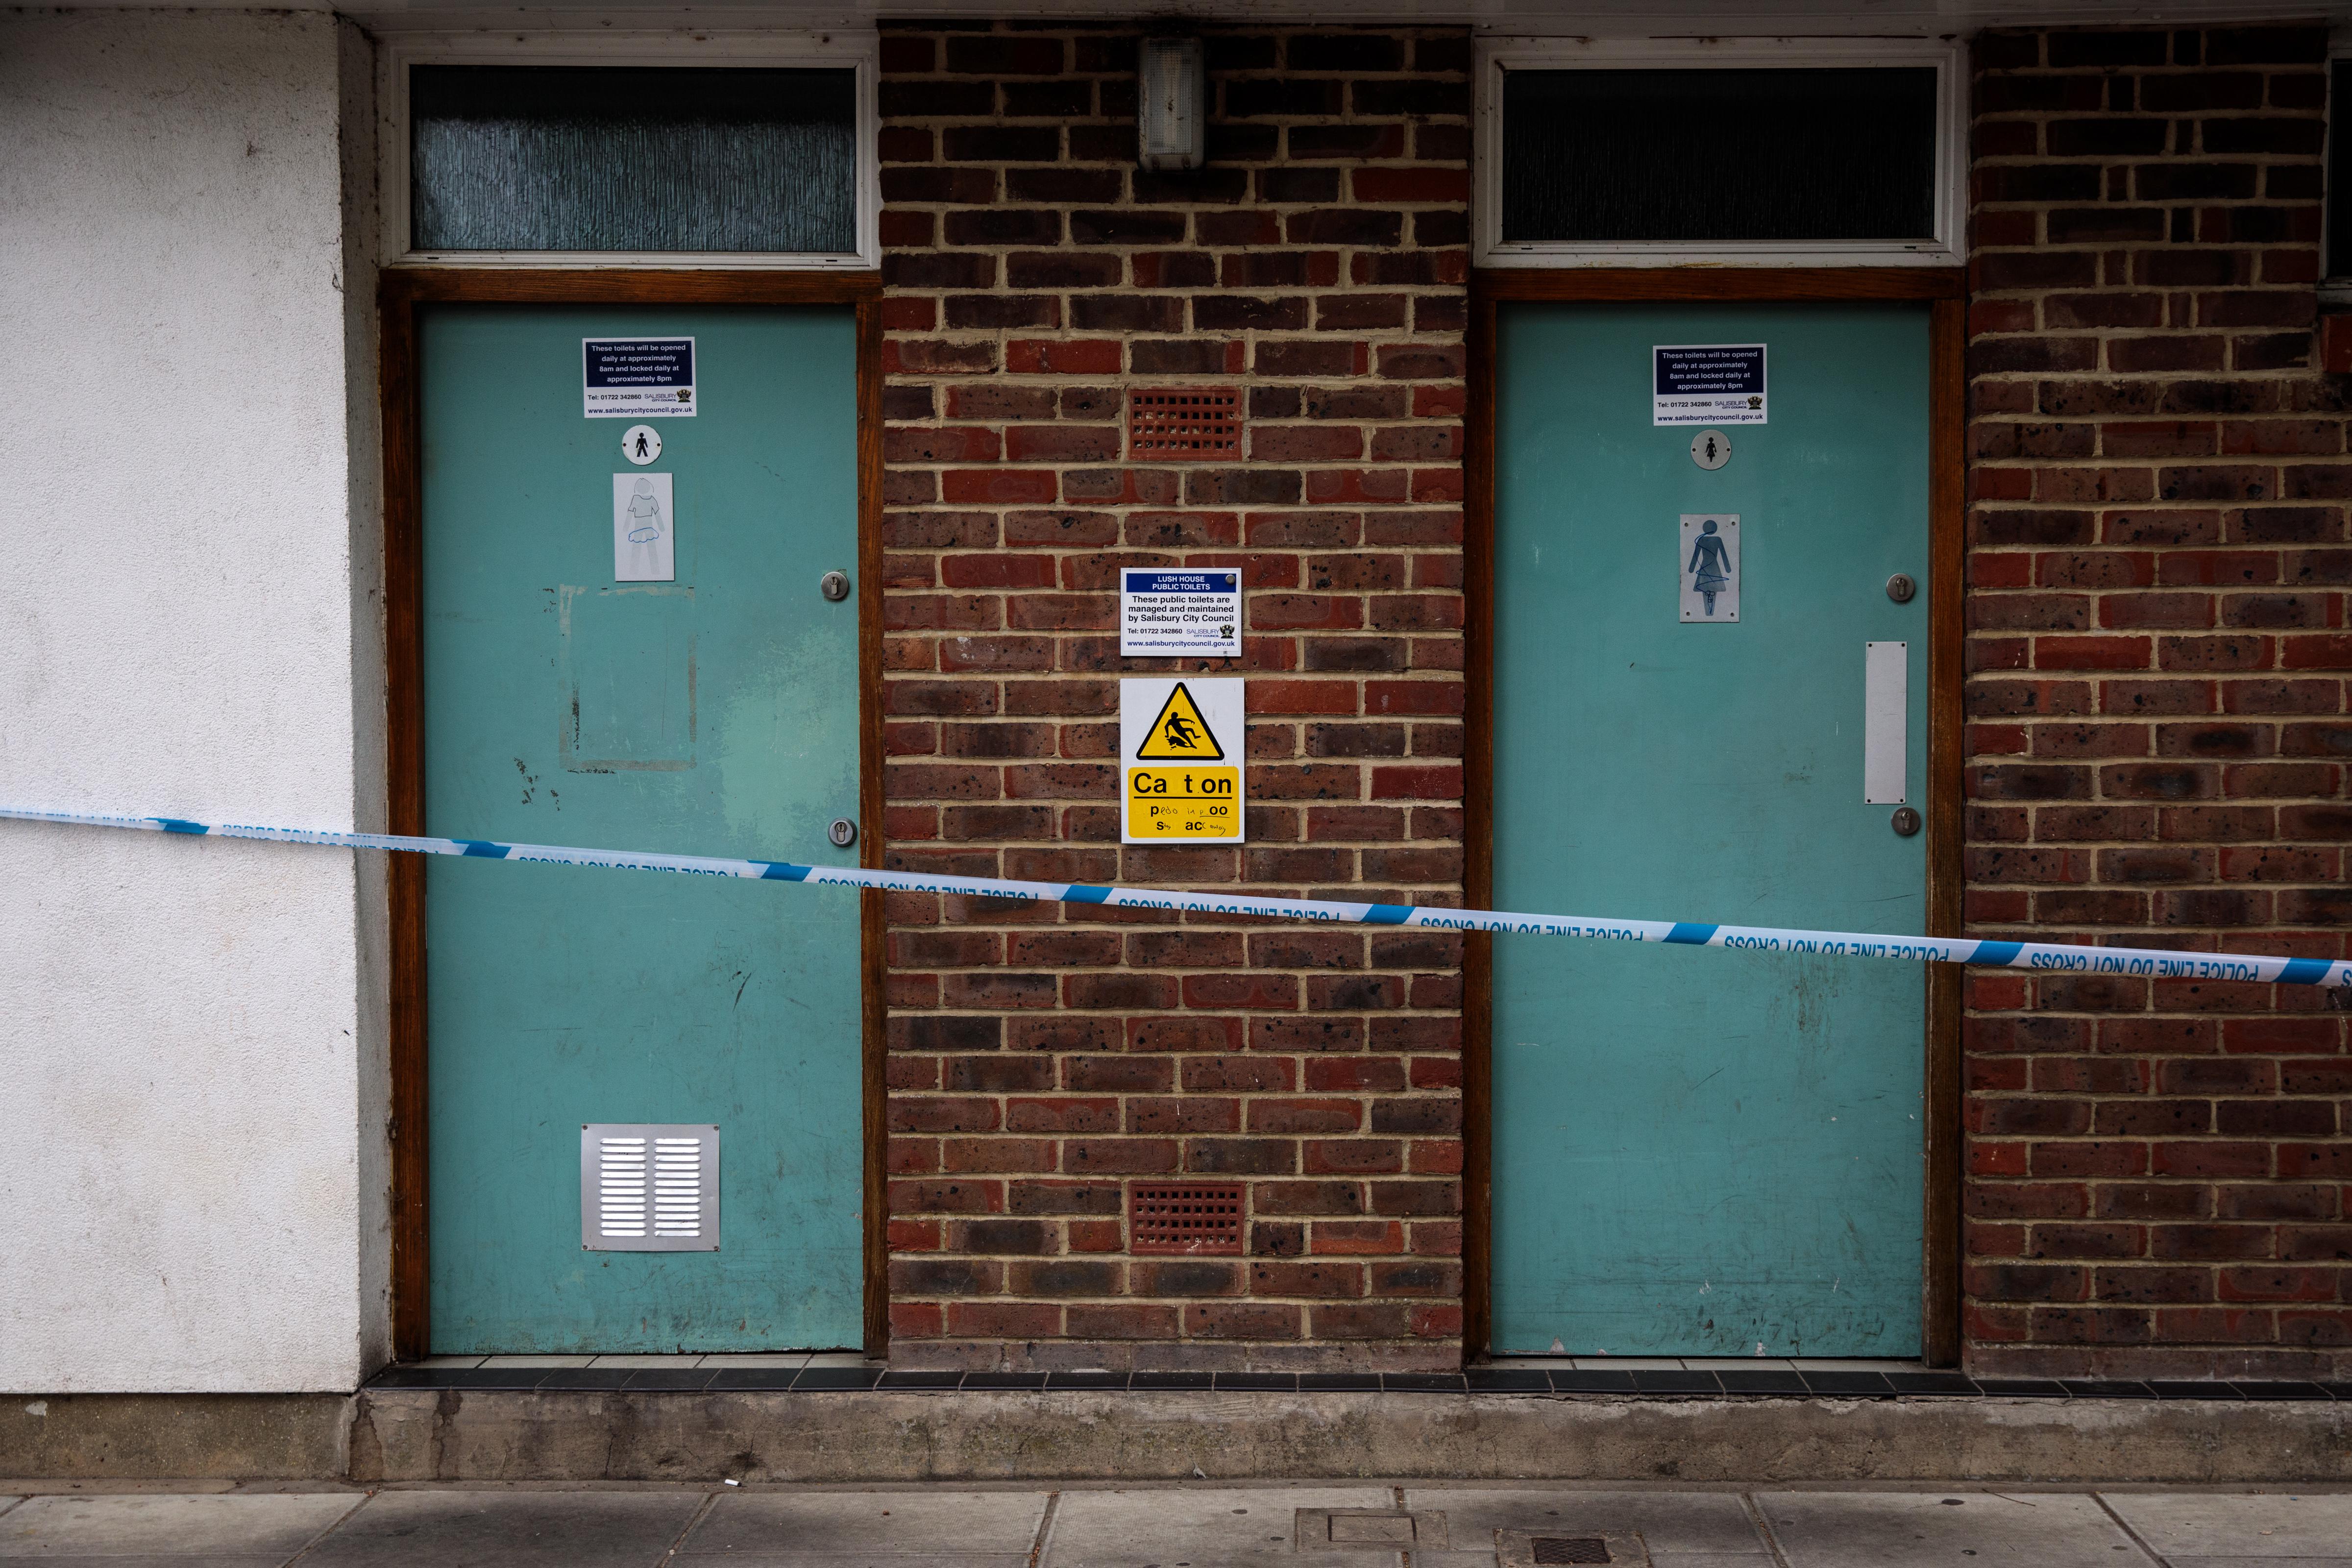 A police cordon in place around male and female public toilets at Queen Elizabeth Gardens in Salisbury, thought to be connected to a man and woman in Amesbury who are in hospital after being exposed to the nerve agent Novichok on July 4, 2018 in Salisbury, England. 